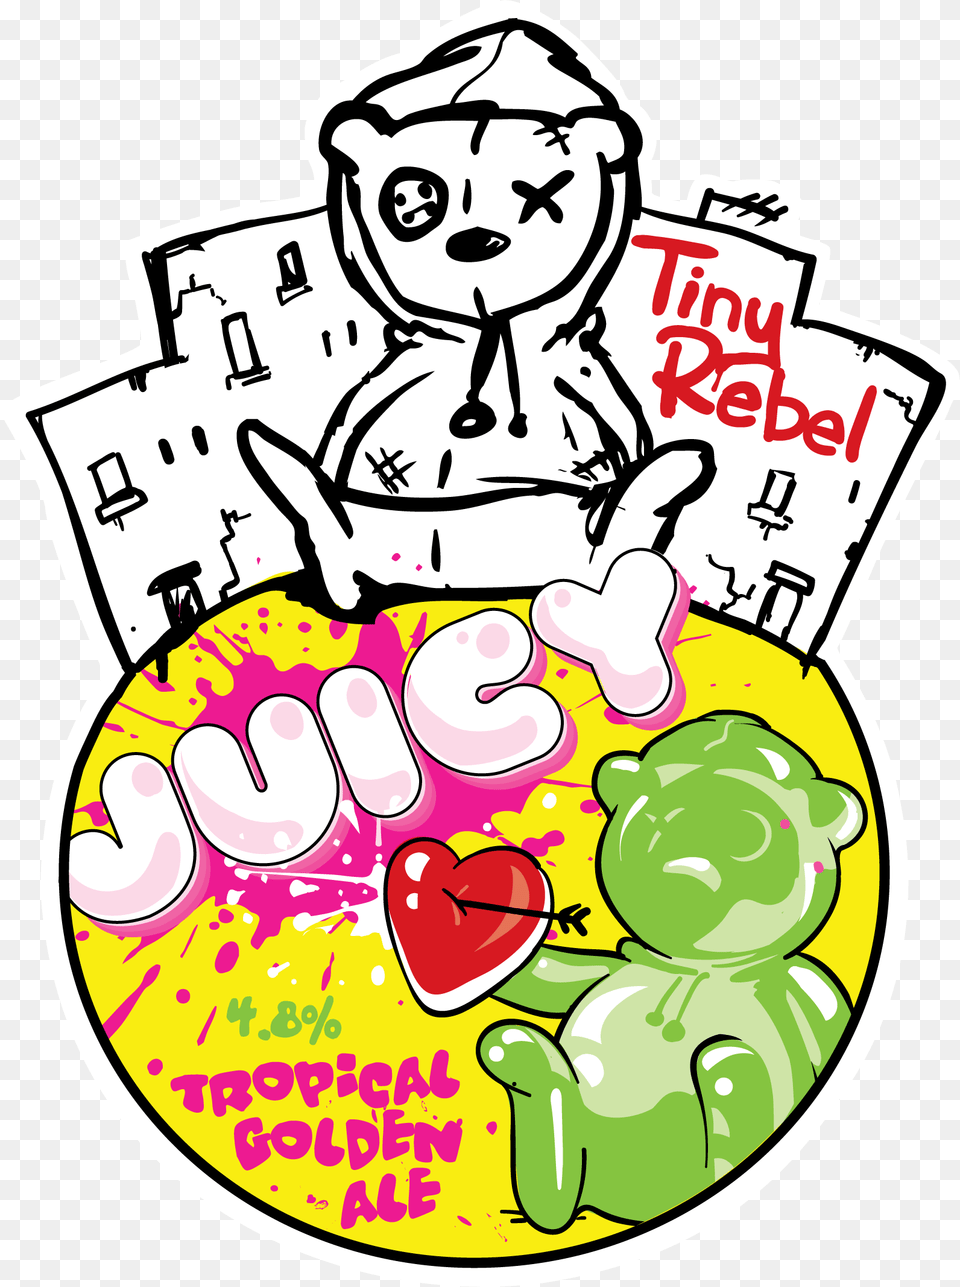 Juicy Tiny Rebel Brewing, Advertisement, Sticker, Poster, Publication Png Image